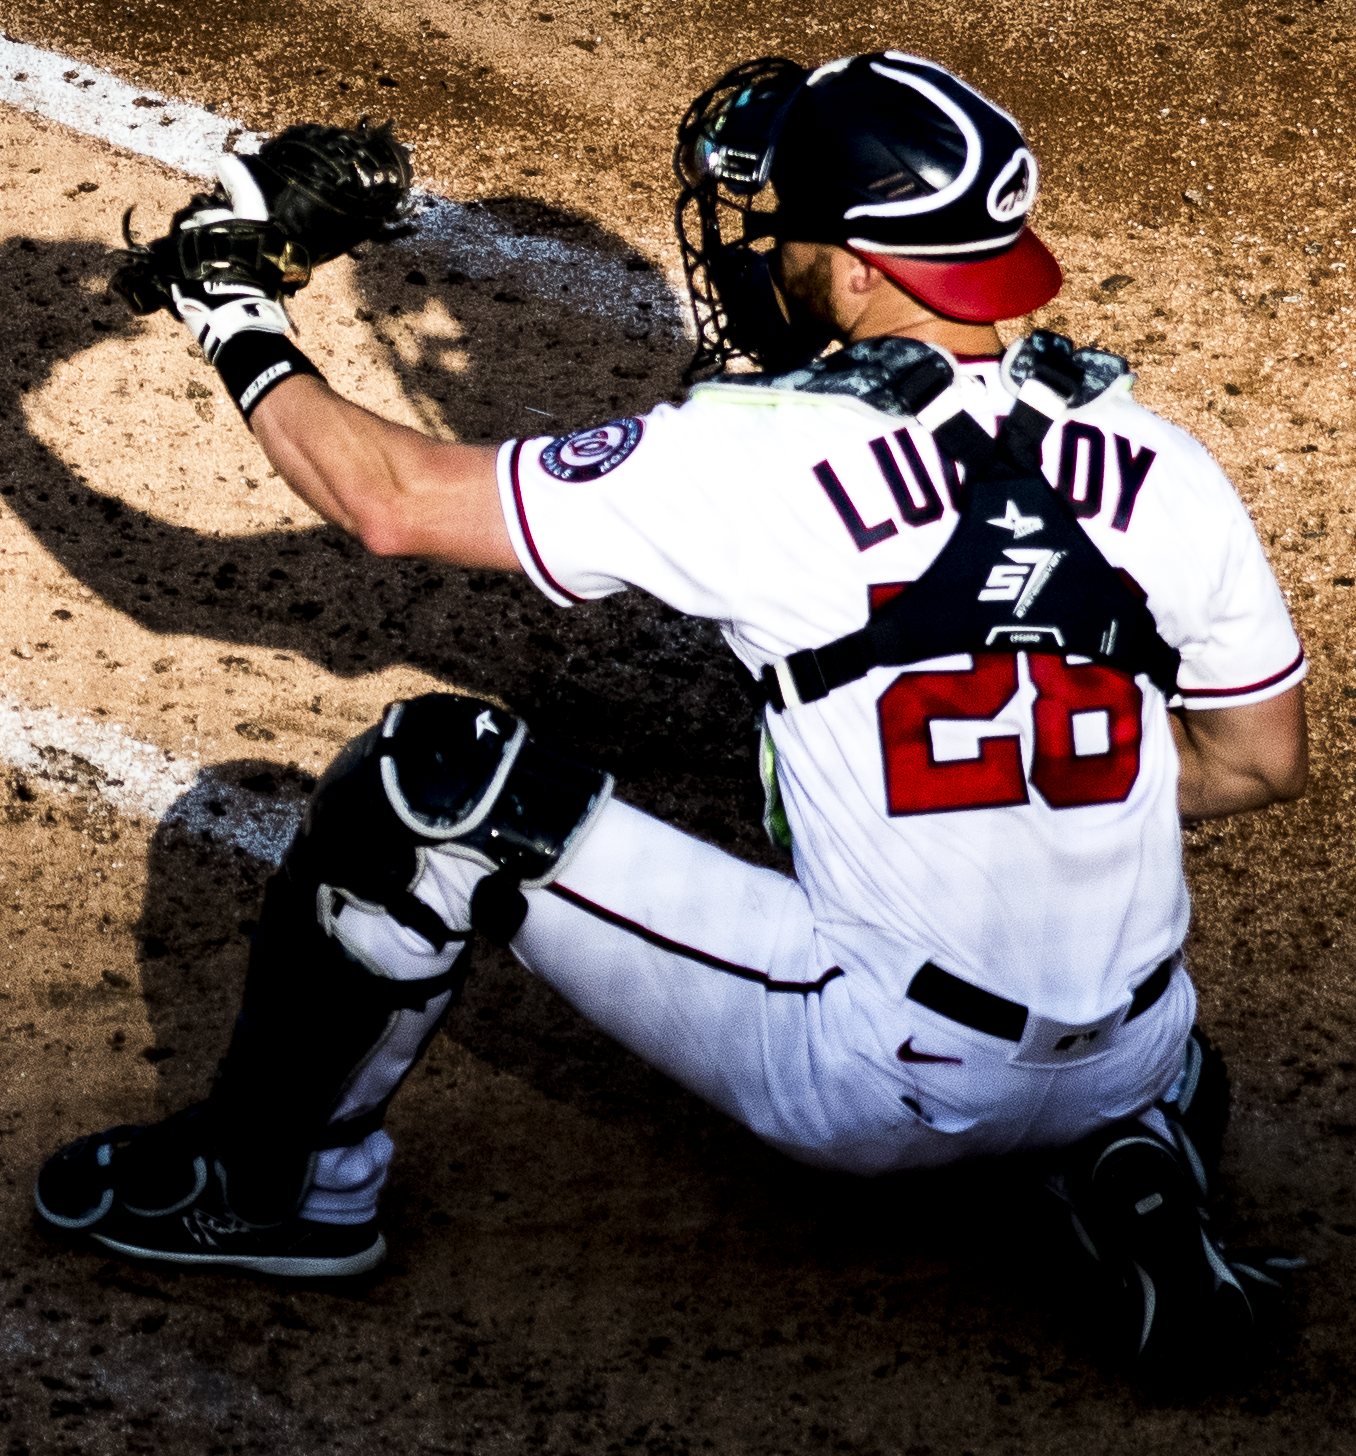 File:Jonathan Lucroy from Nationals vs. Braves at Nationals Park